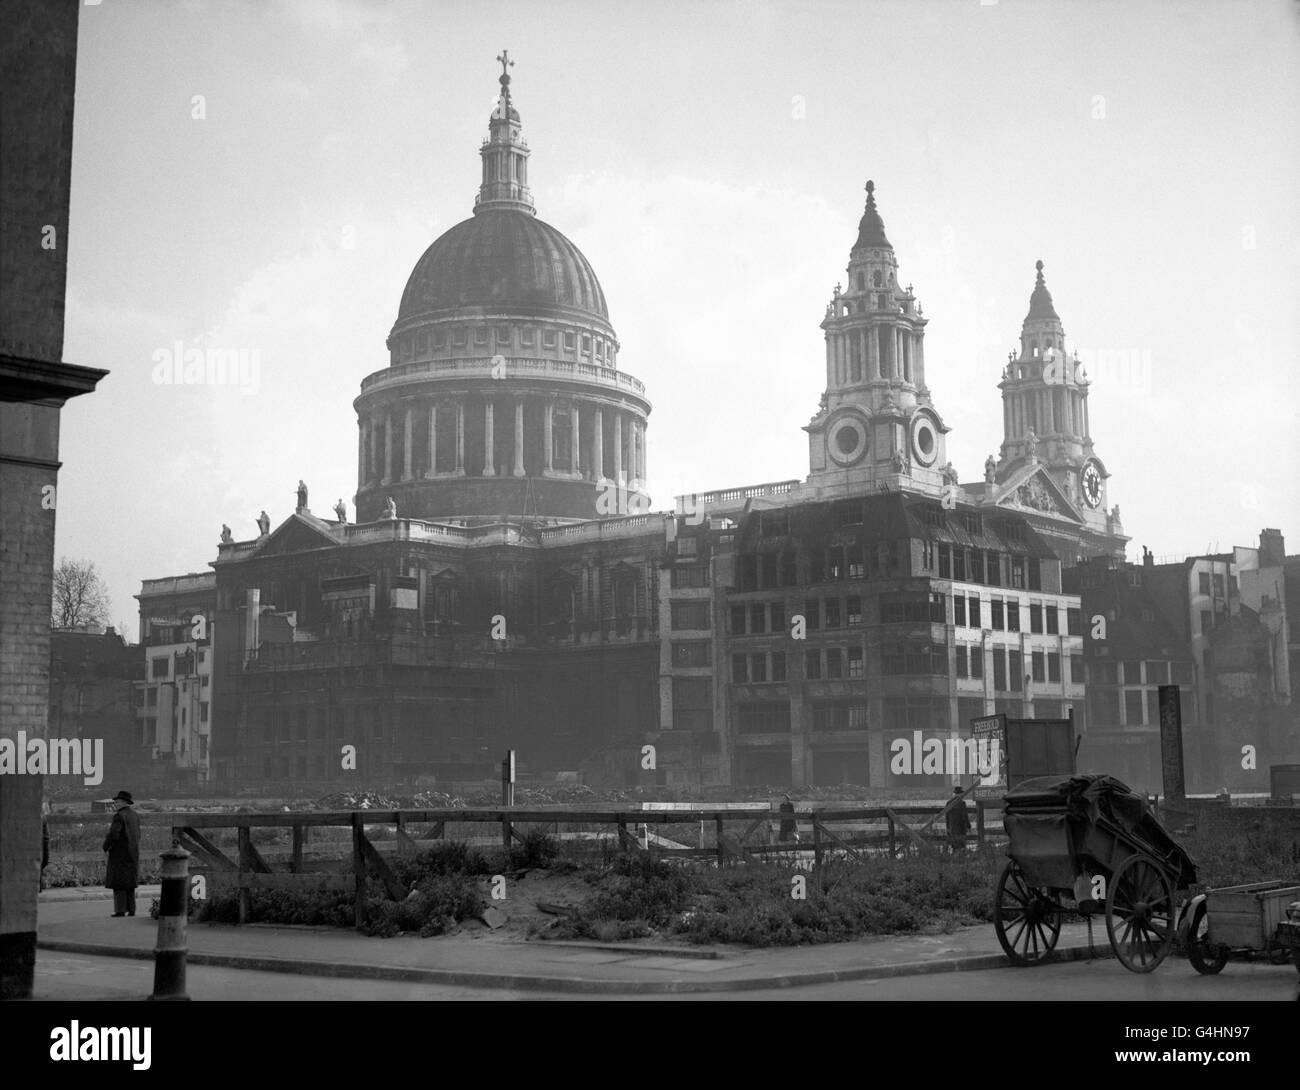 View from Warwick Lane, showing bomb damage around St Paul's Cathedral, caused by Luftwaffe bombing during the Second World War. Stock Photo